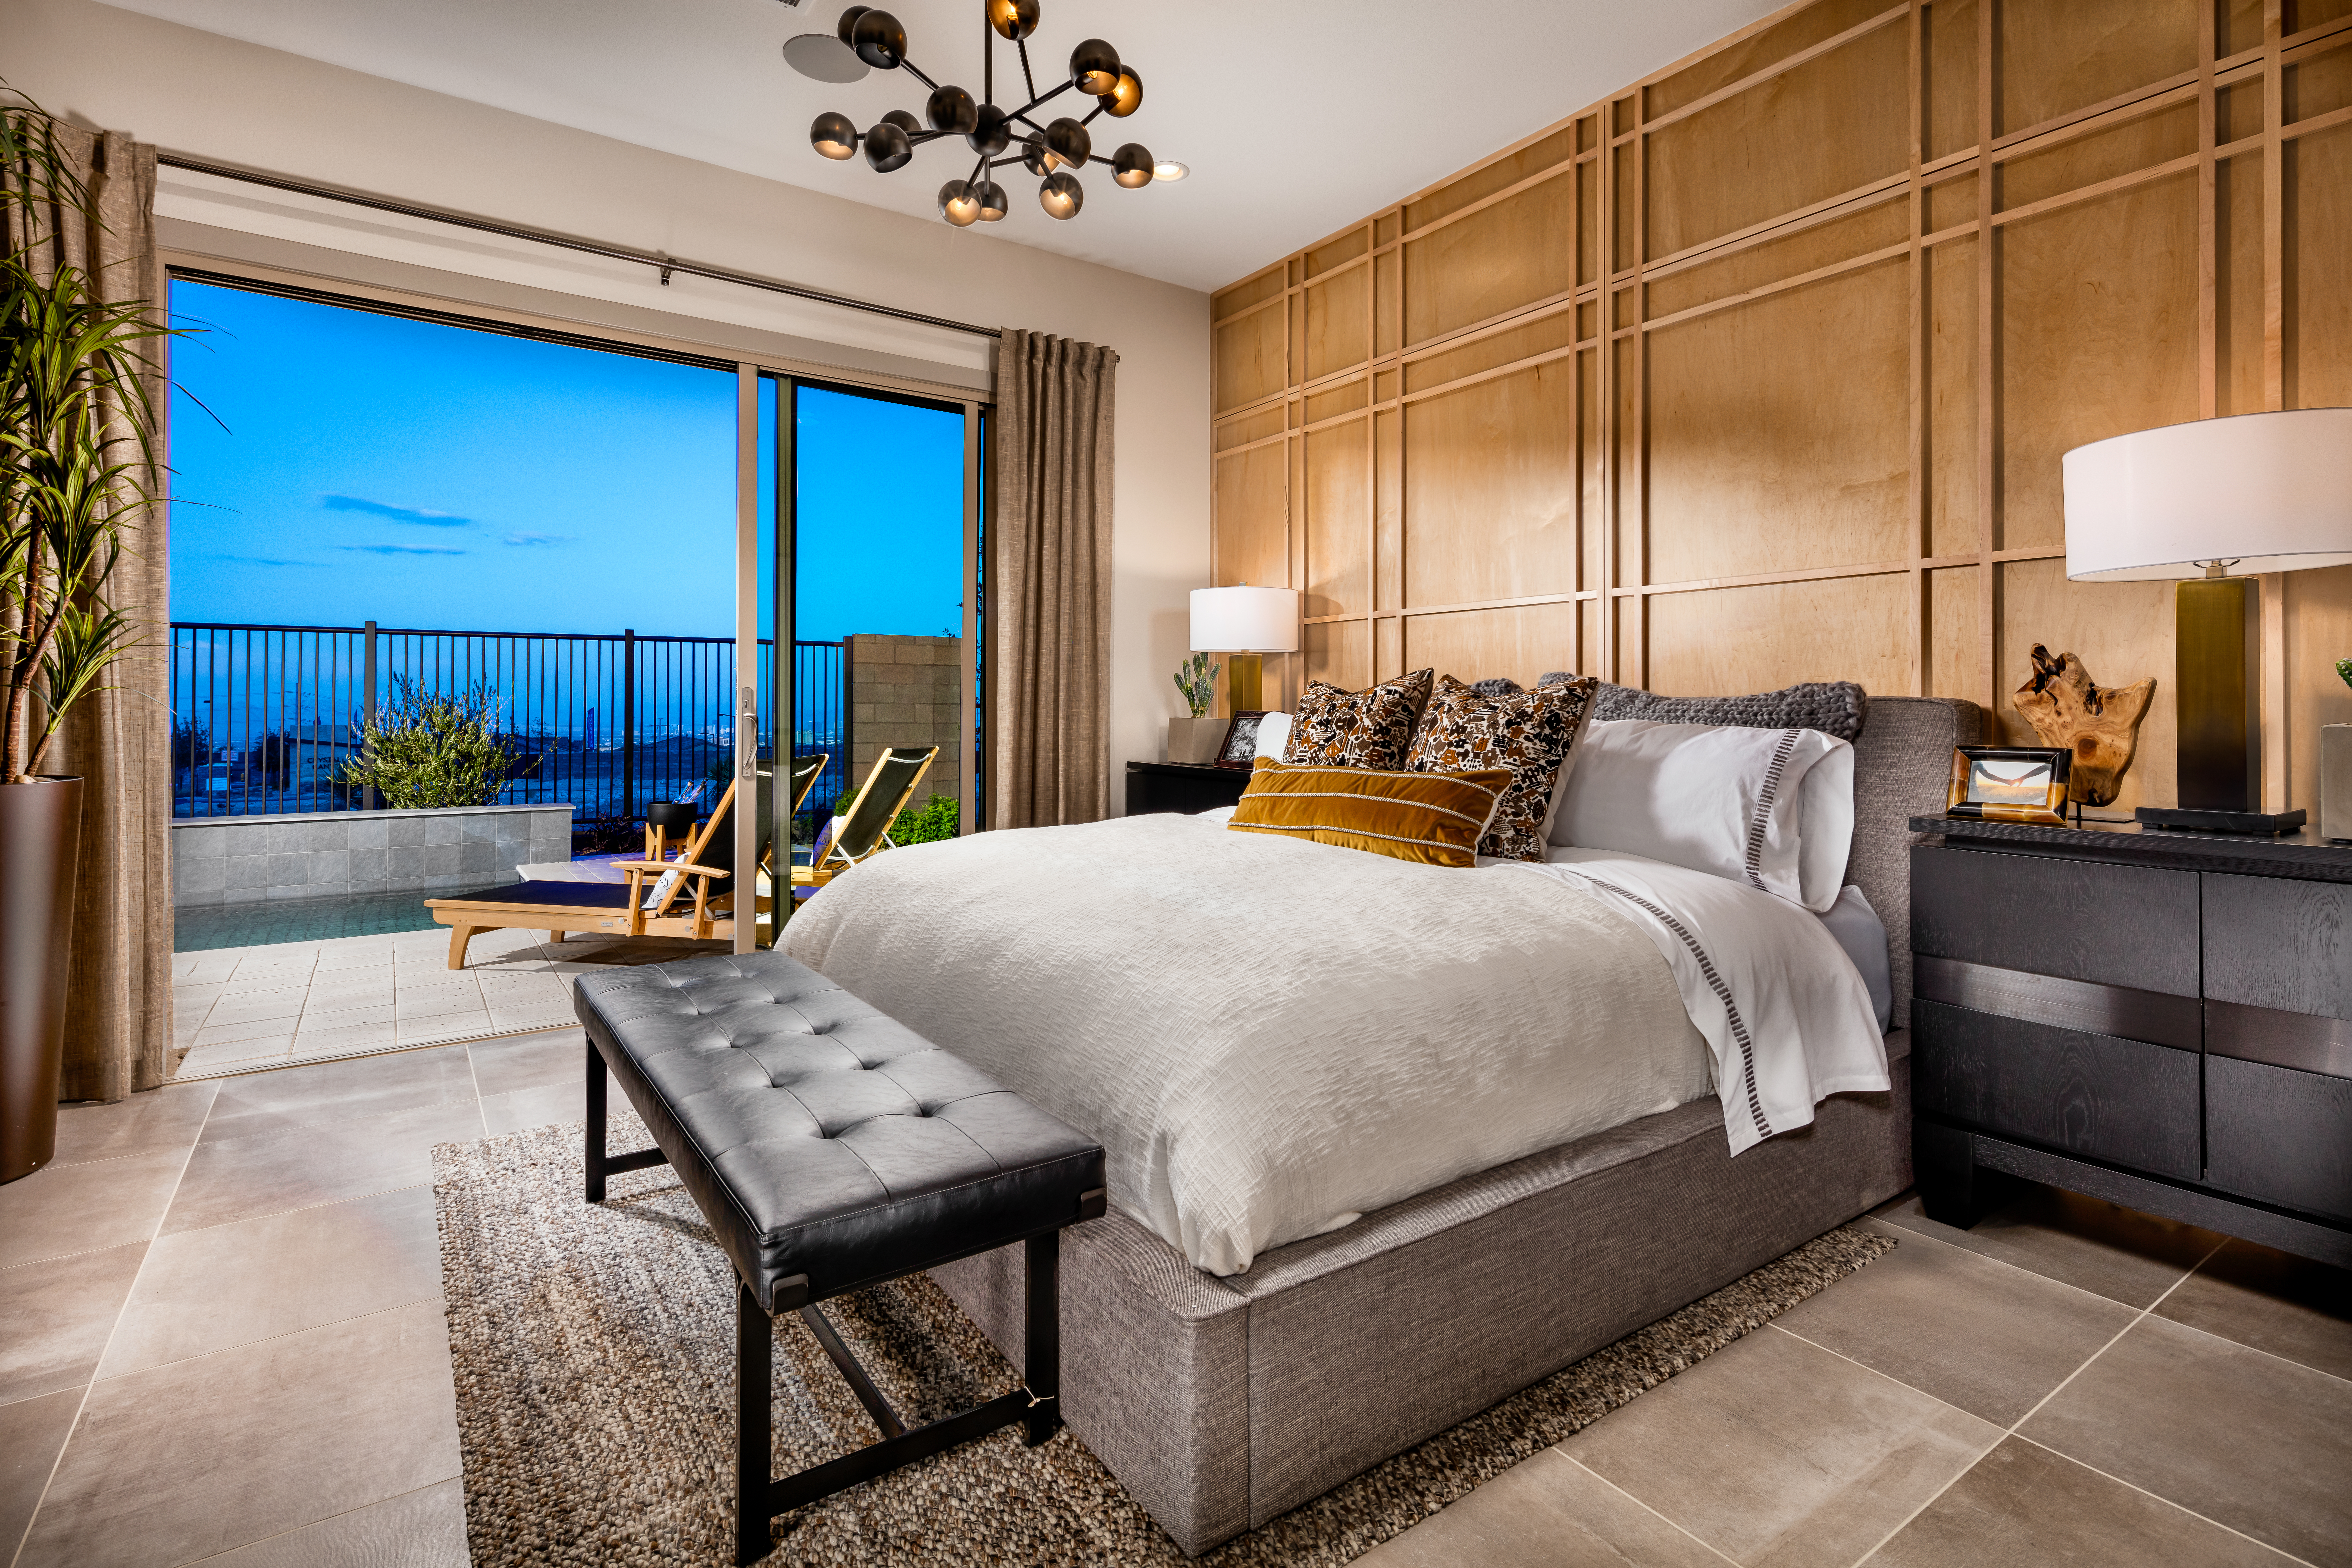 Primary Bedroom of Estella Model at Acadia Ridge by Toll Brothers